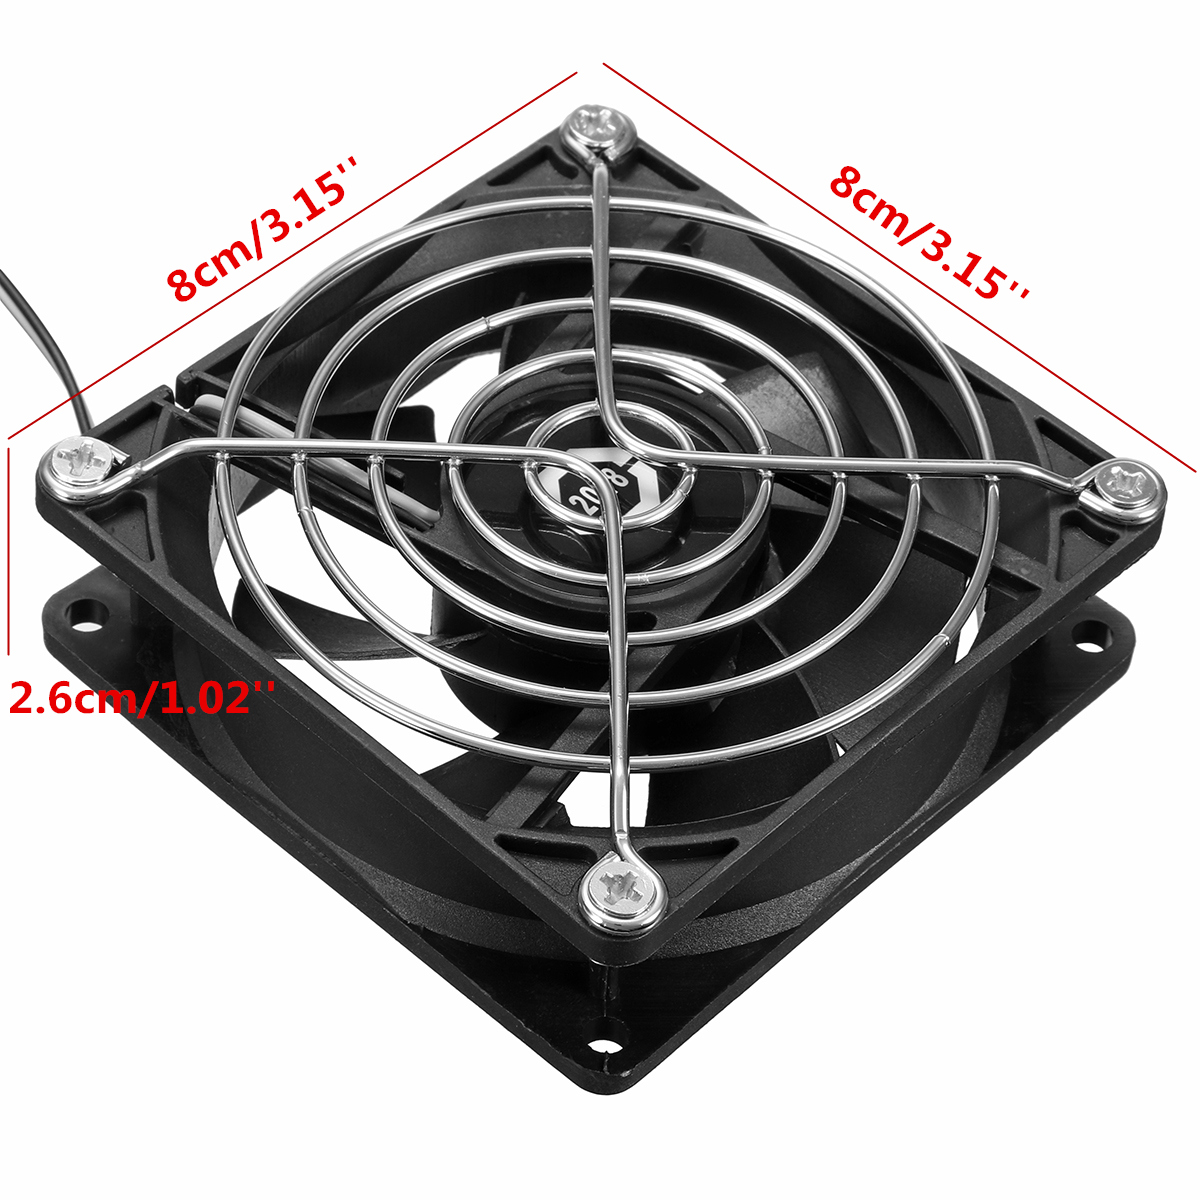 8cm-USB-Cooling-Fan-Heatsink-for-PC-Computer-TV-Box-for-Xbox-for-PlayStation-Electronics-1301696-4